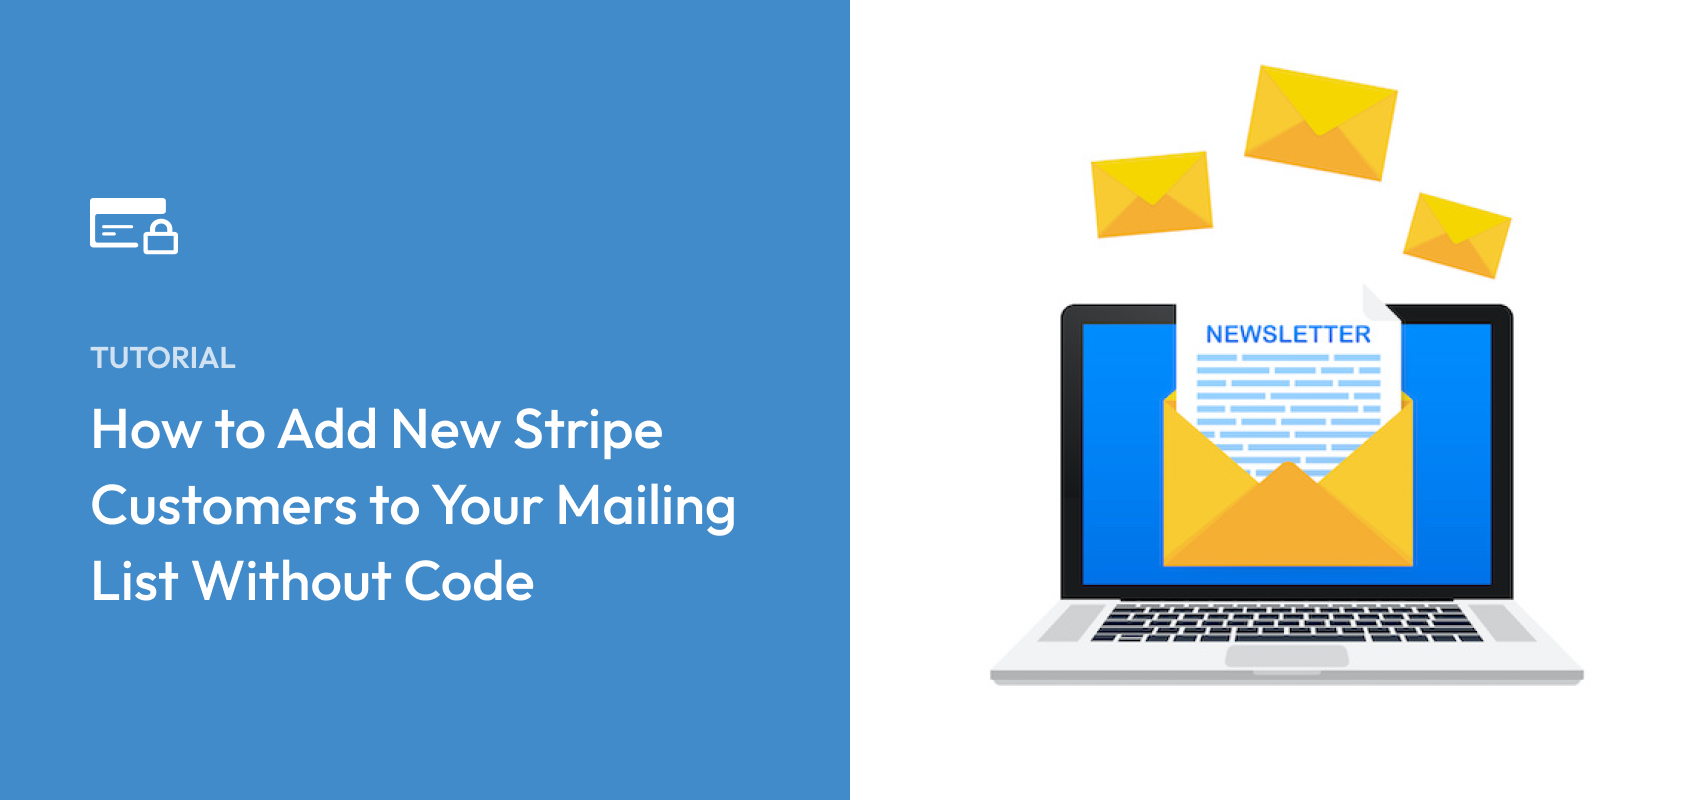 How to Add New Stripe Customers to Your Mailing List Without Code